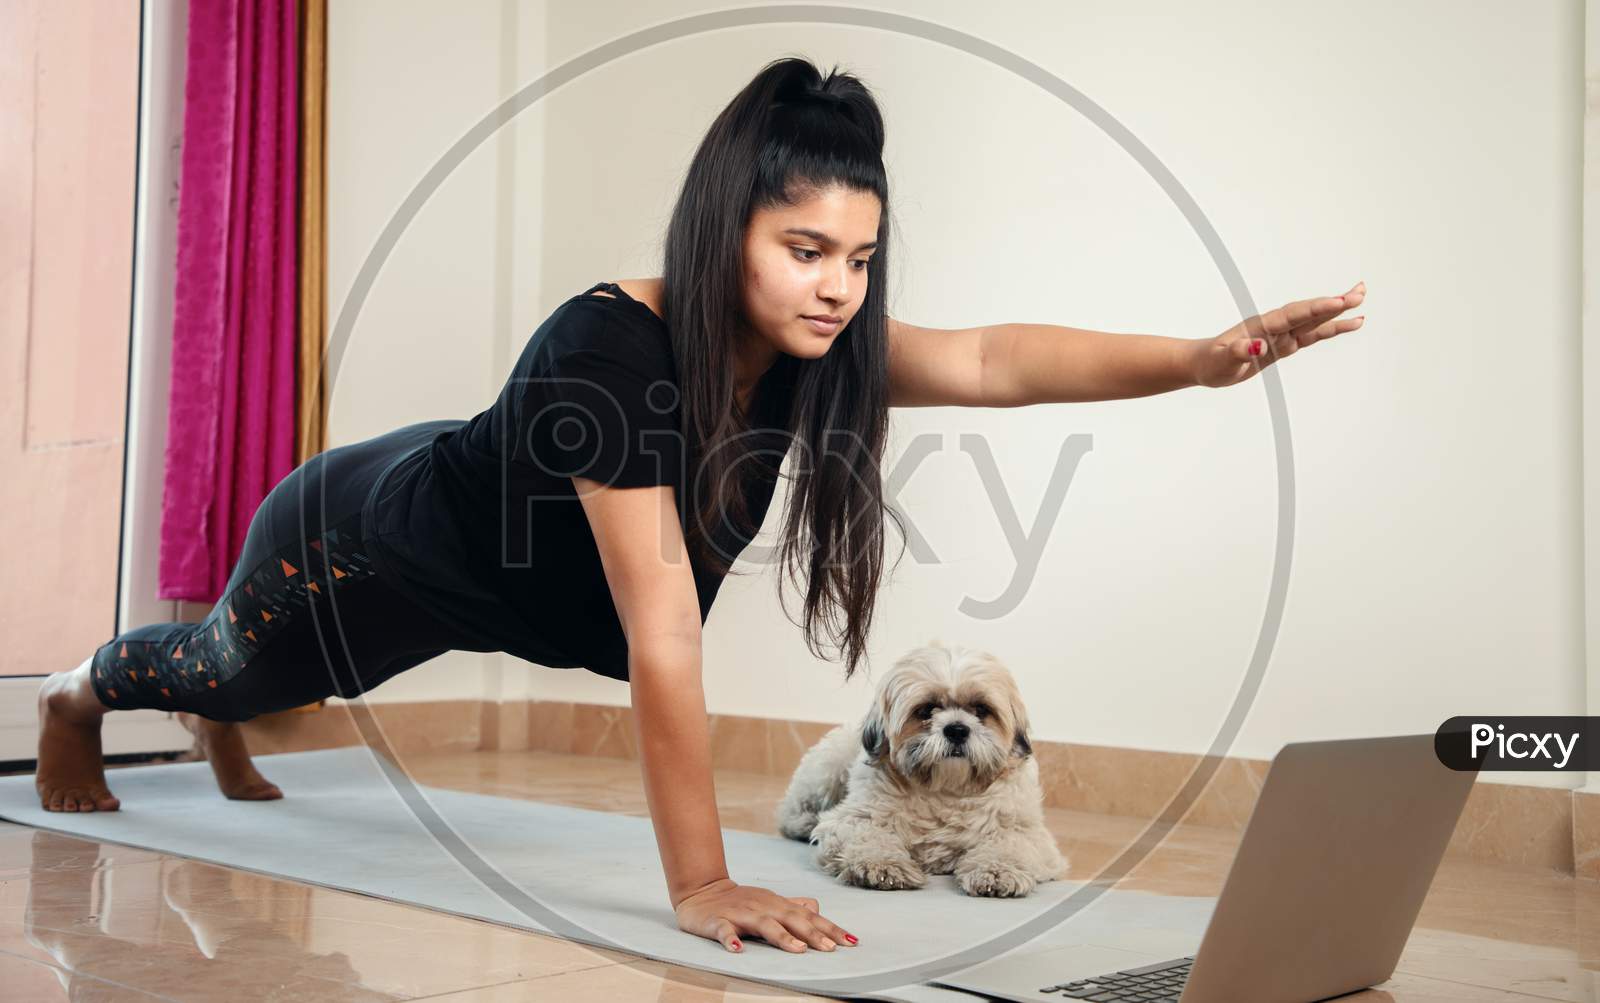 Young Millennial Girl Learning Yoga From Home During Online Class By Looking Laptop - Concept Of E-Learning, New Normal, Home Workout Due To Coronavirus Covid-19 Lockdown